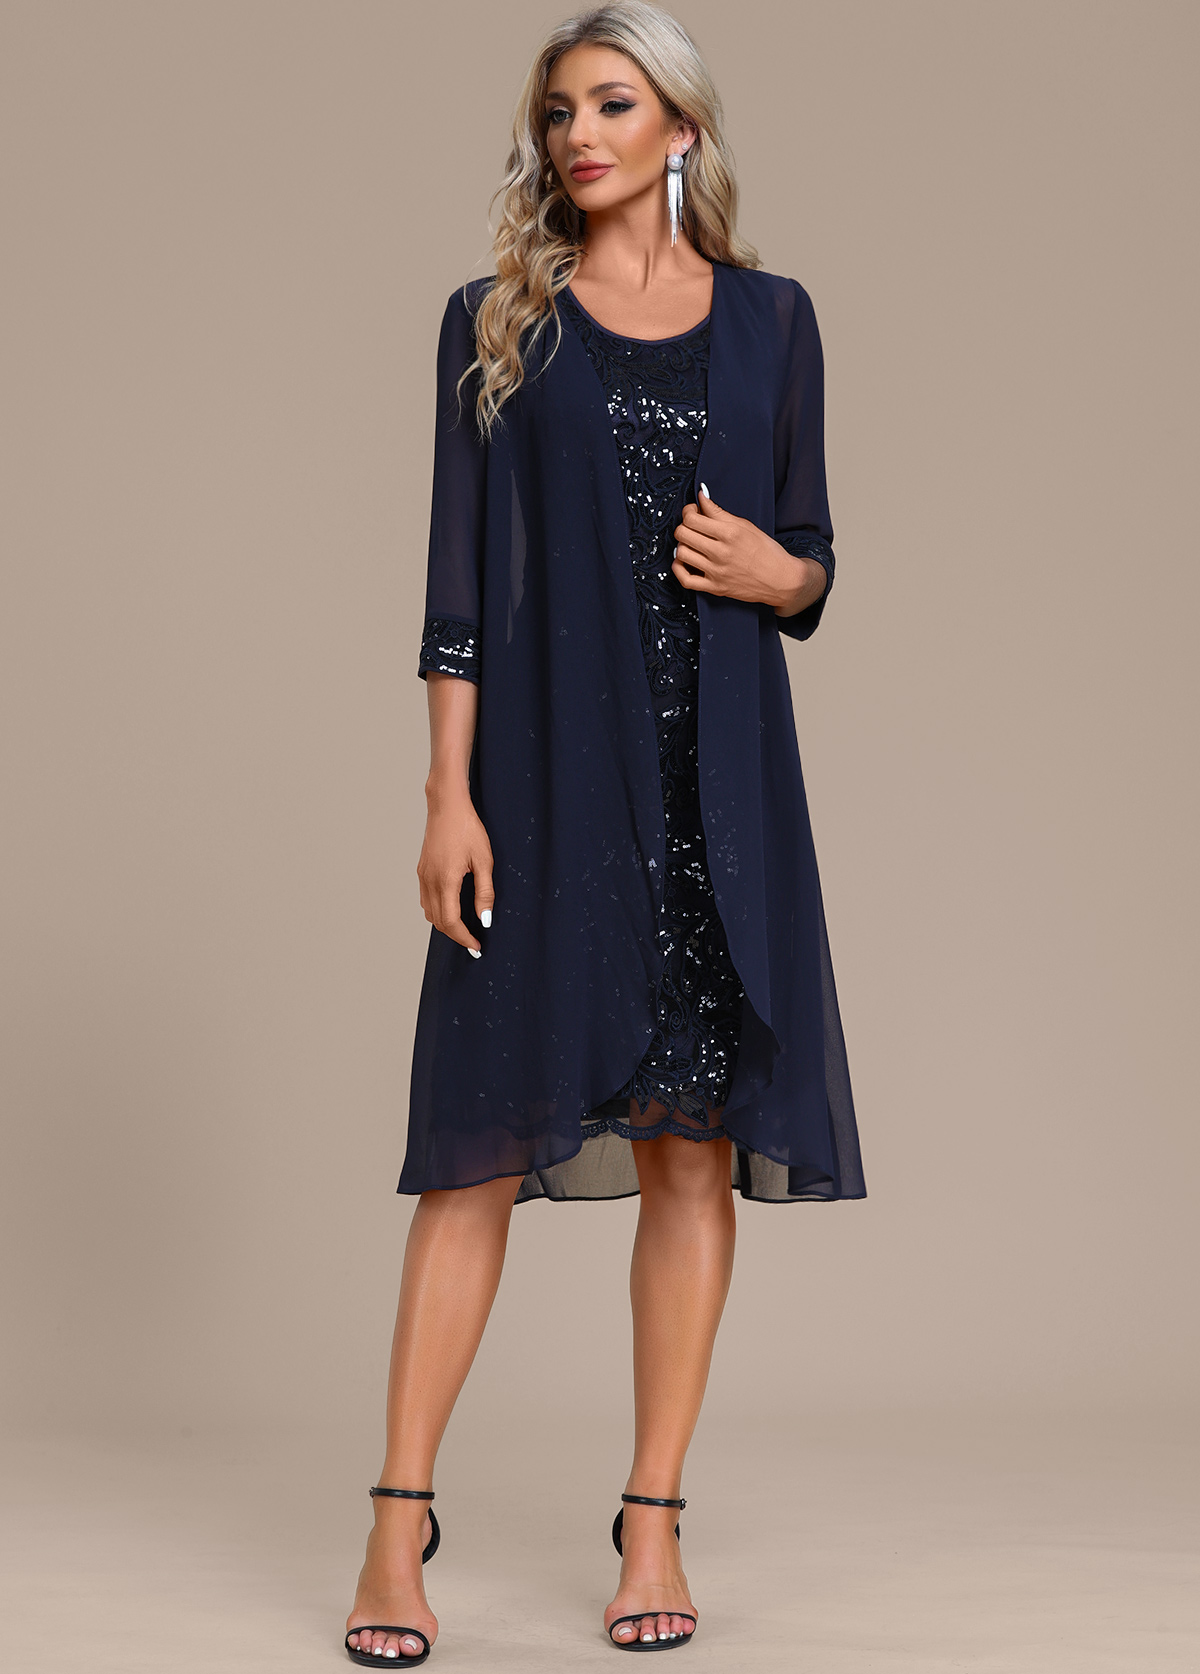 Navy Lace Sequin Shift Dress and Cardigan | modlily.com - USD 42.98